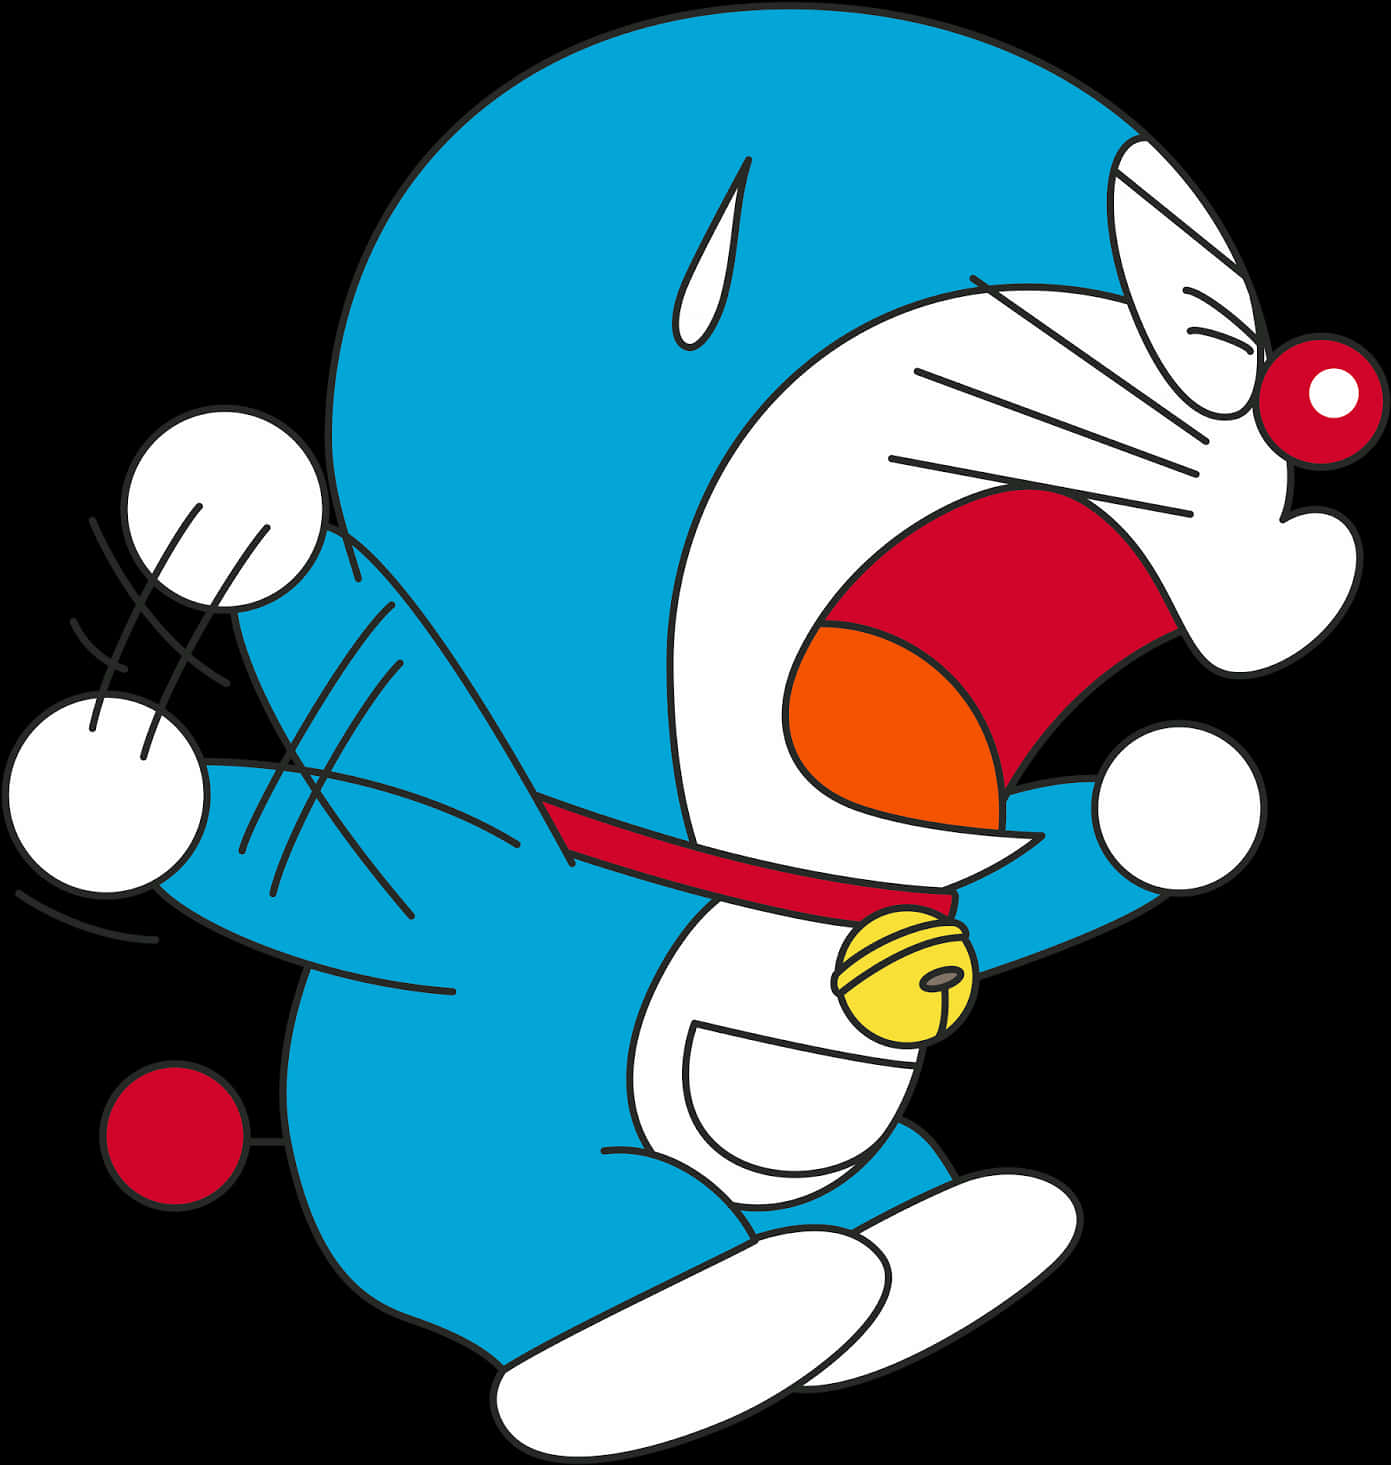 Cartoon Character With A Red Nose And A Blue Cat With A Red Nose And A Yellow Bell